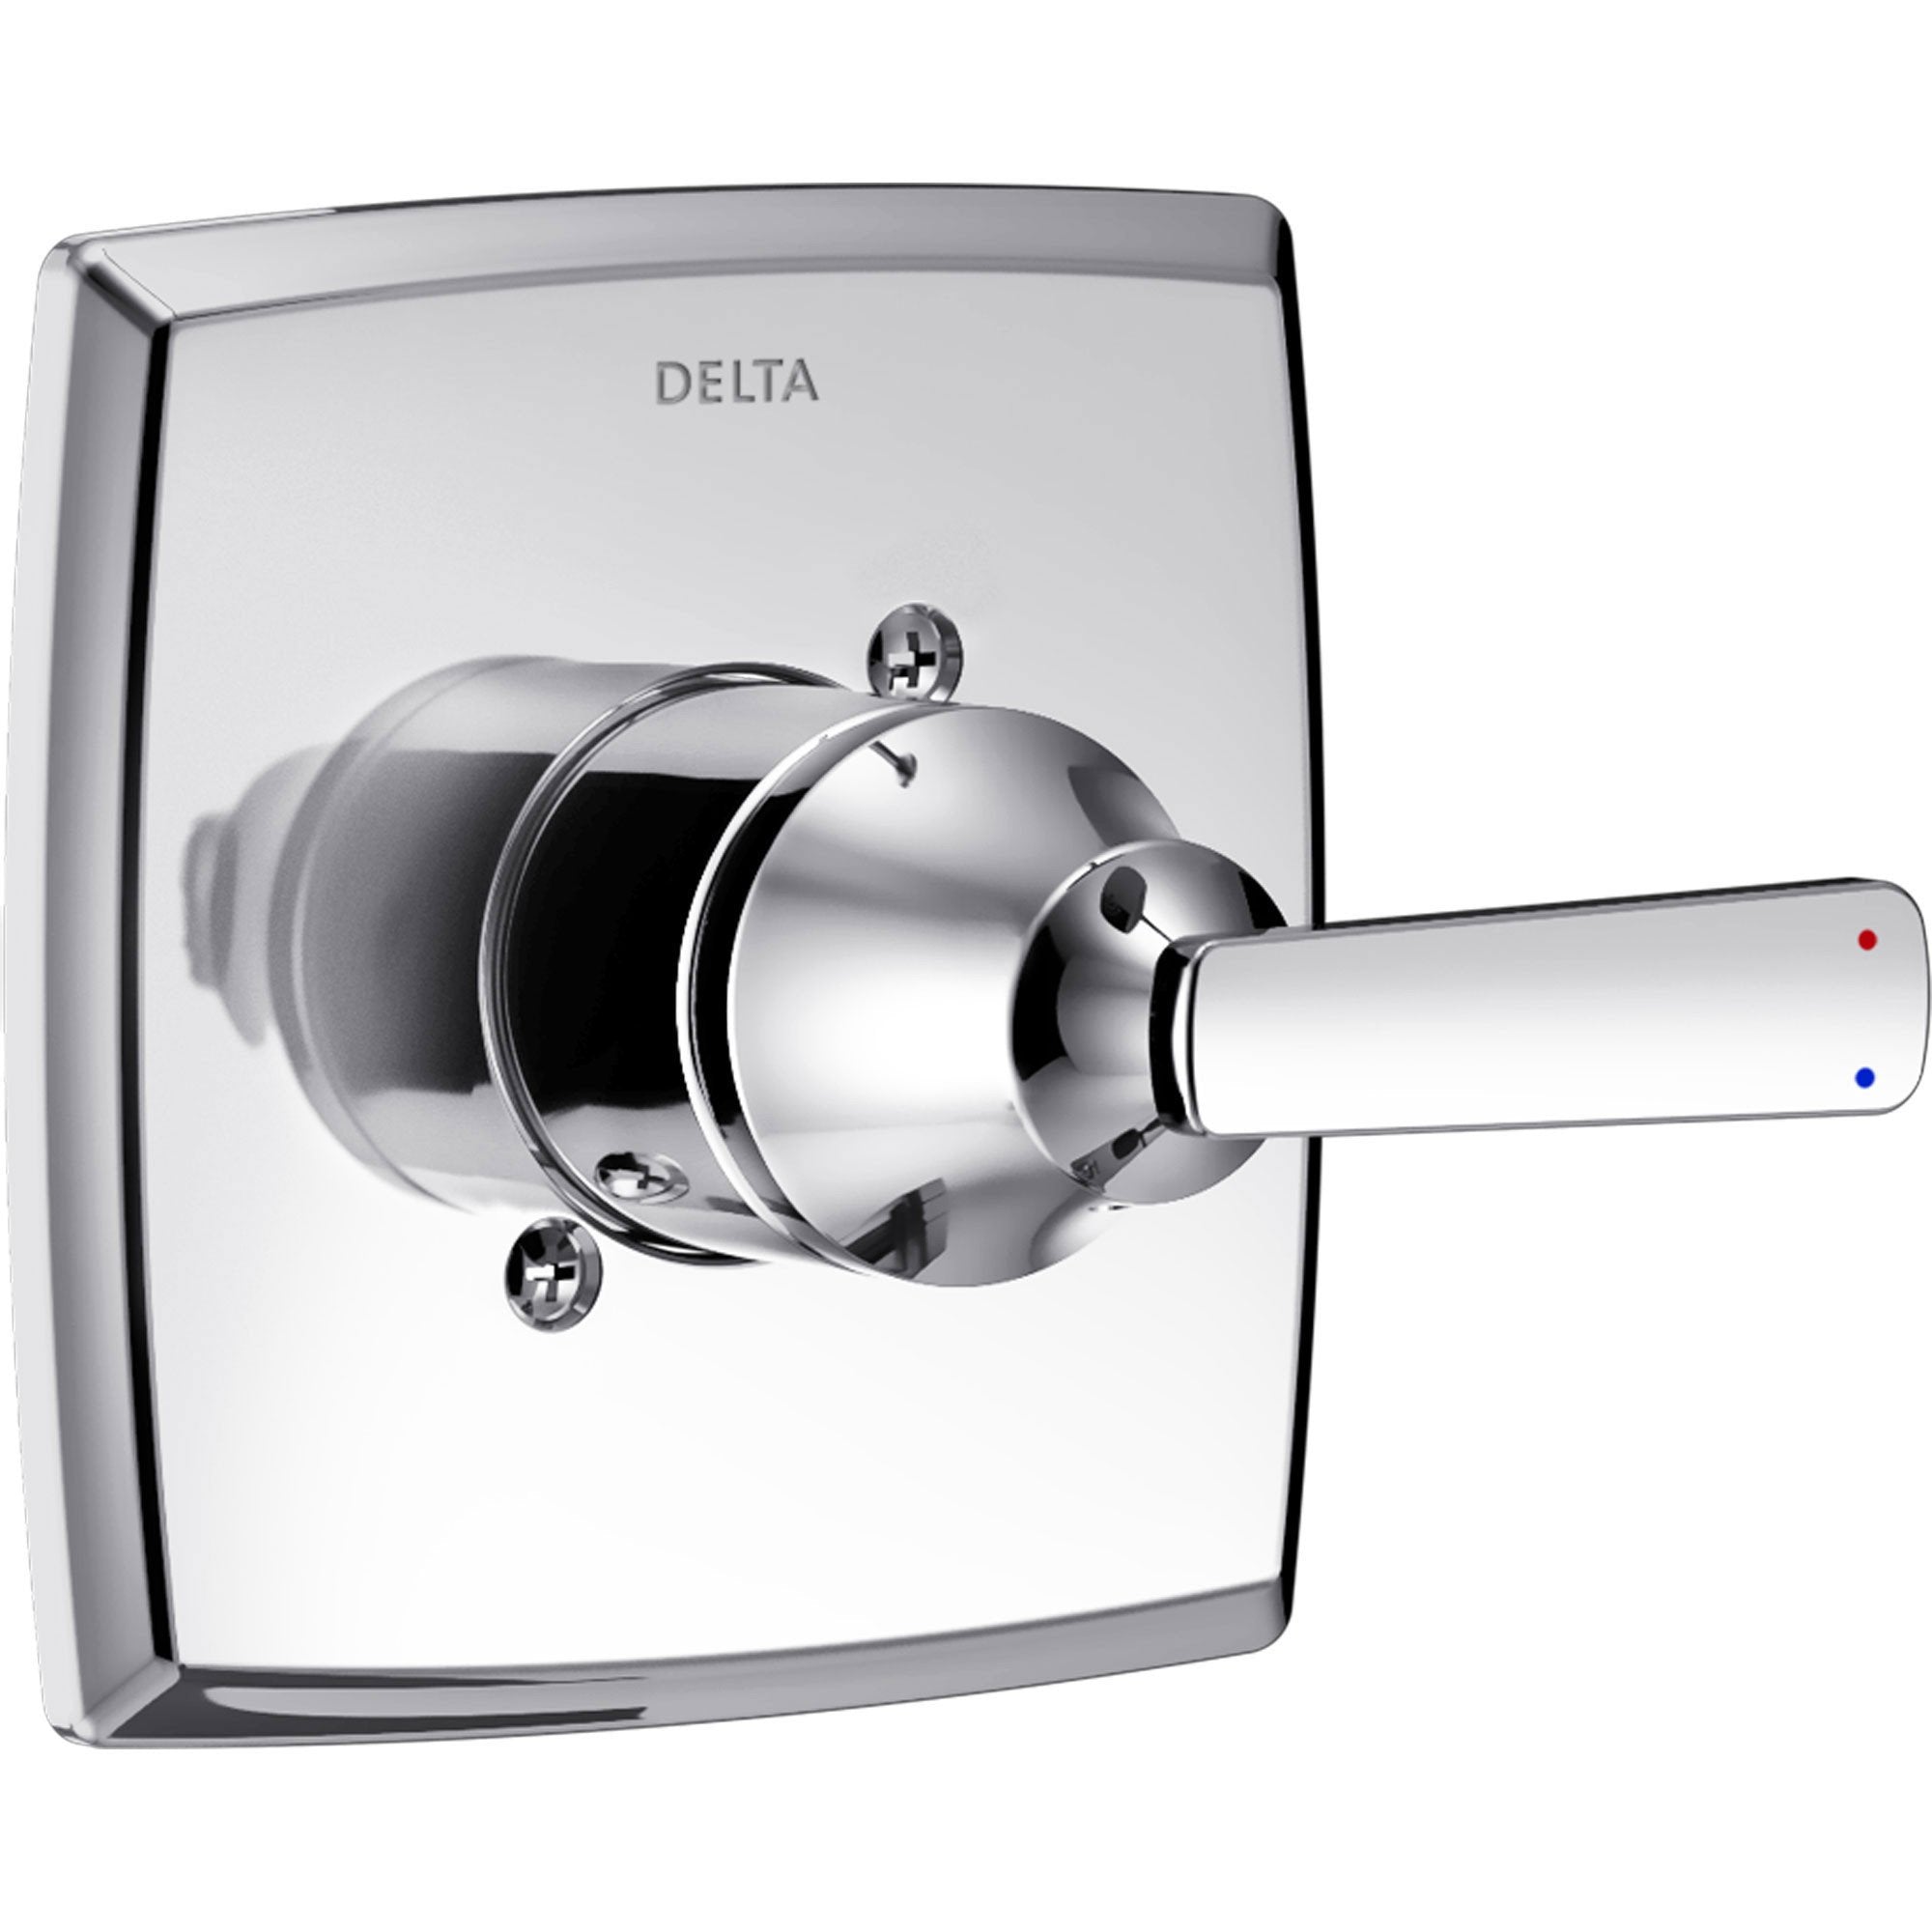 Delta Ashlyn 14 Series Modern Chrome Finish Single Handle Pressure Balanced Shower Faucet Control INCLUDES Rough-in Valve with Stops D1261V